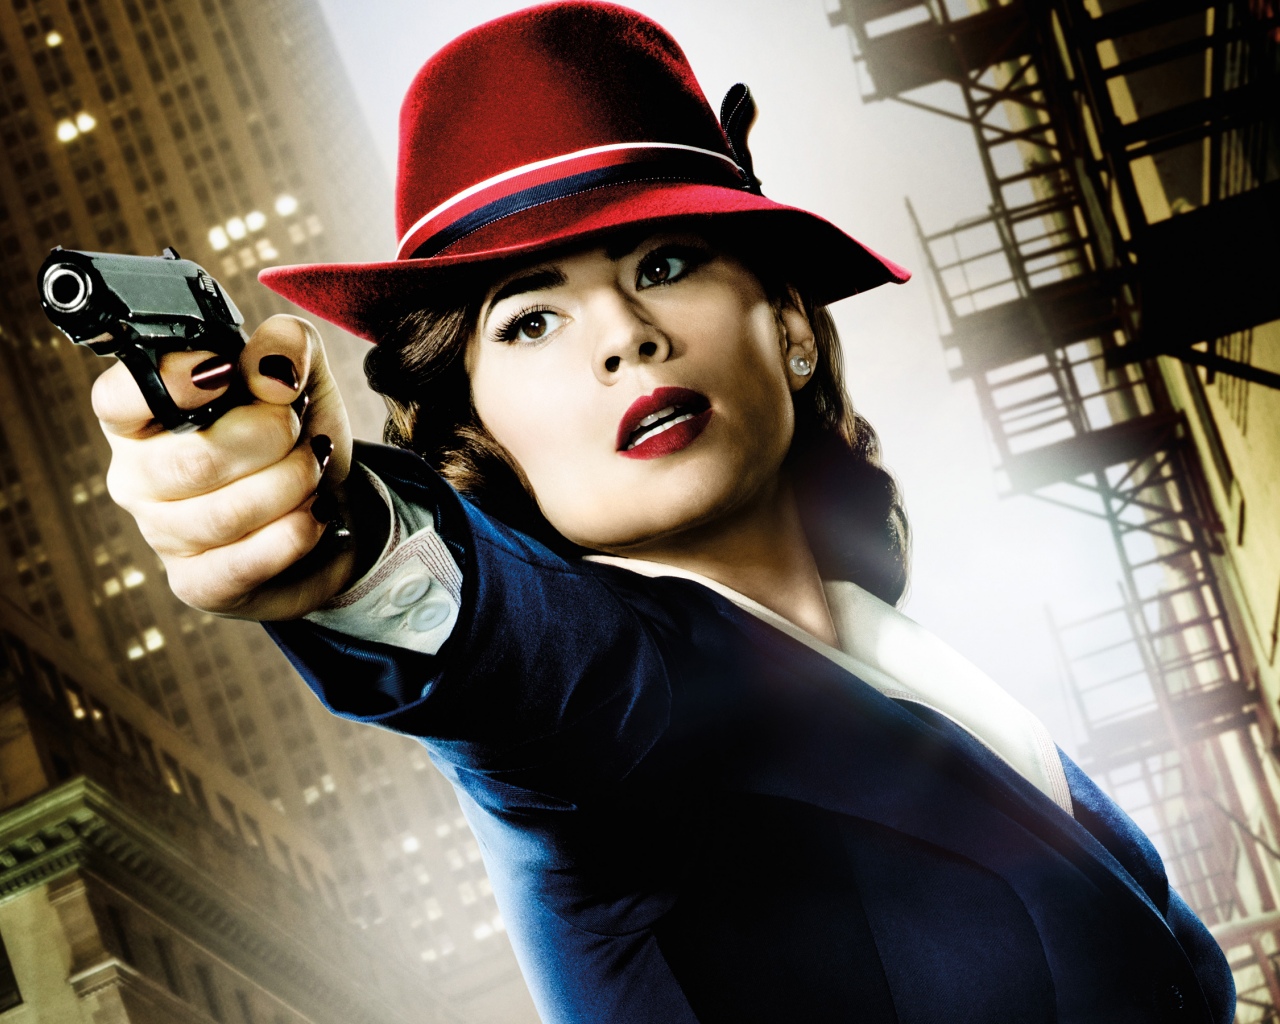 Marvel’s AGENT CARTER Season 1 Blu-ray Steelbook is coming to the UK as an Exclusive